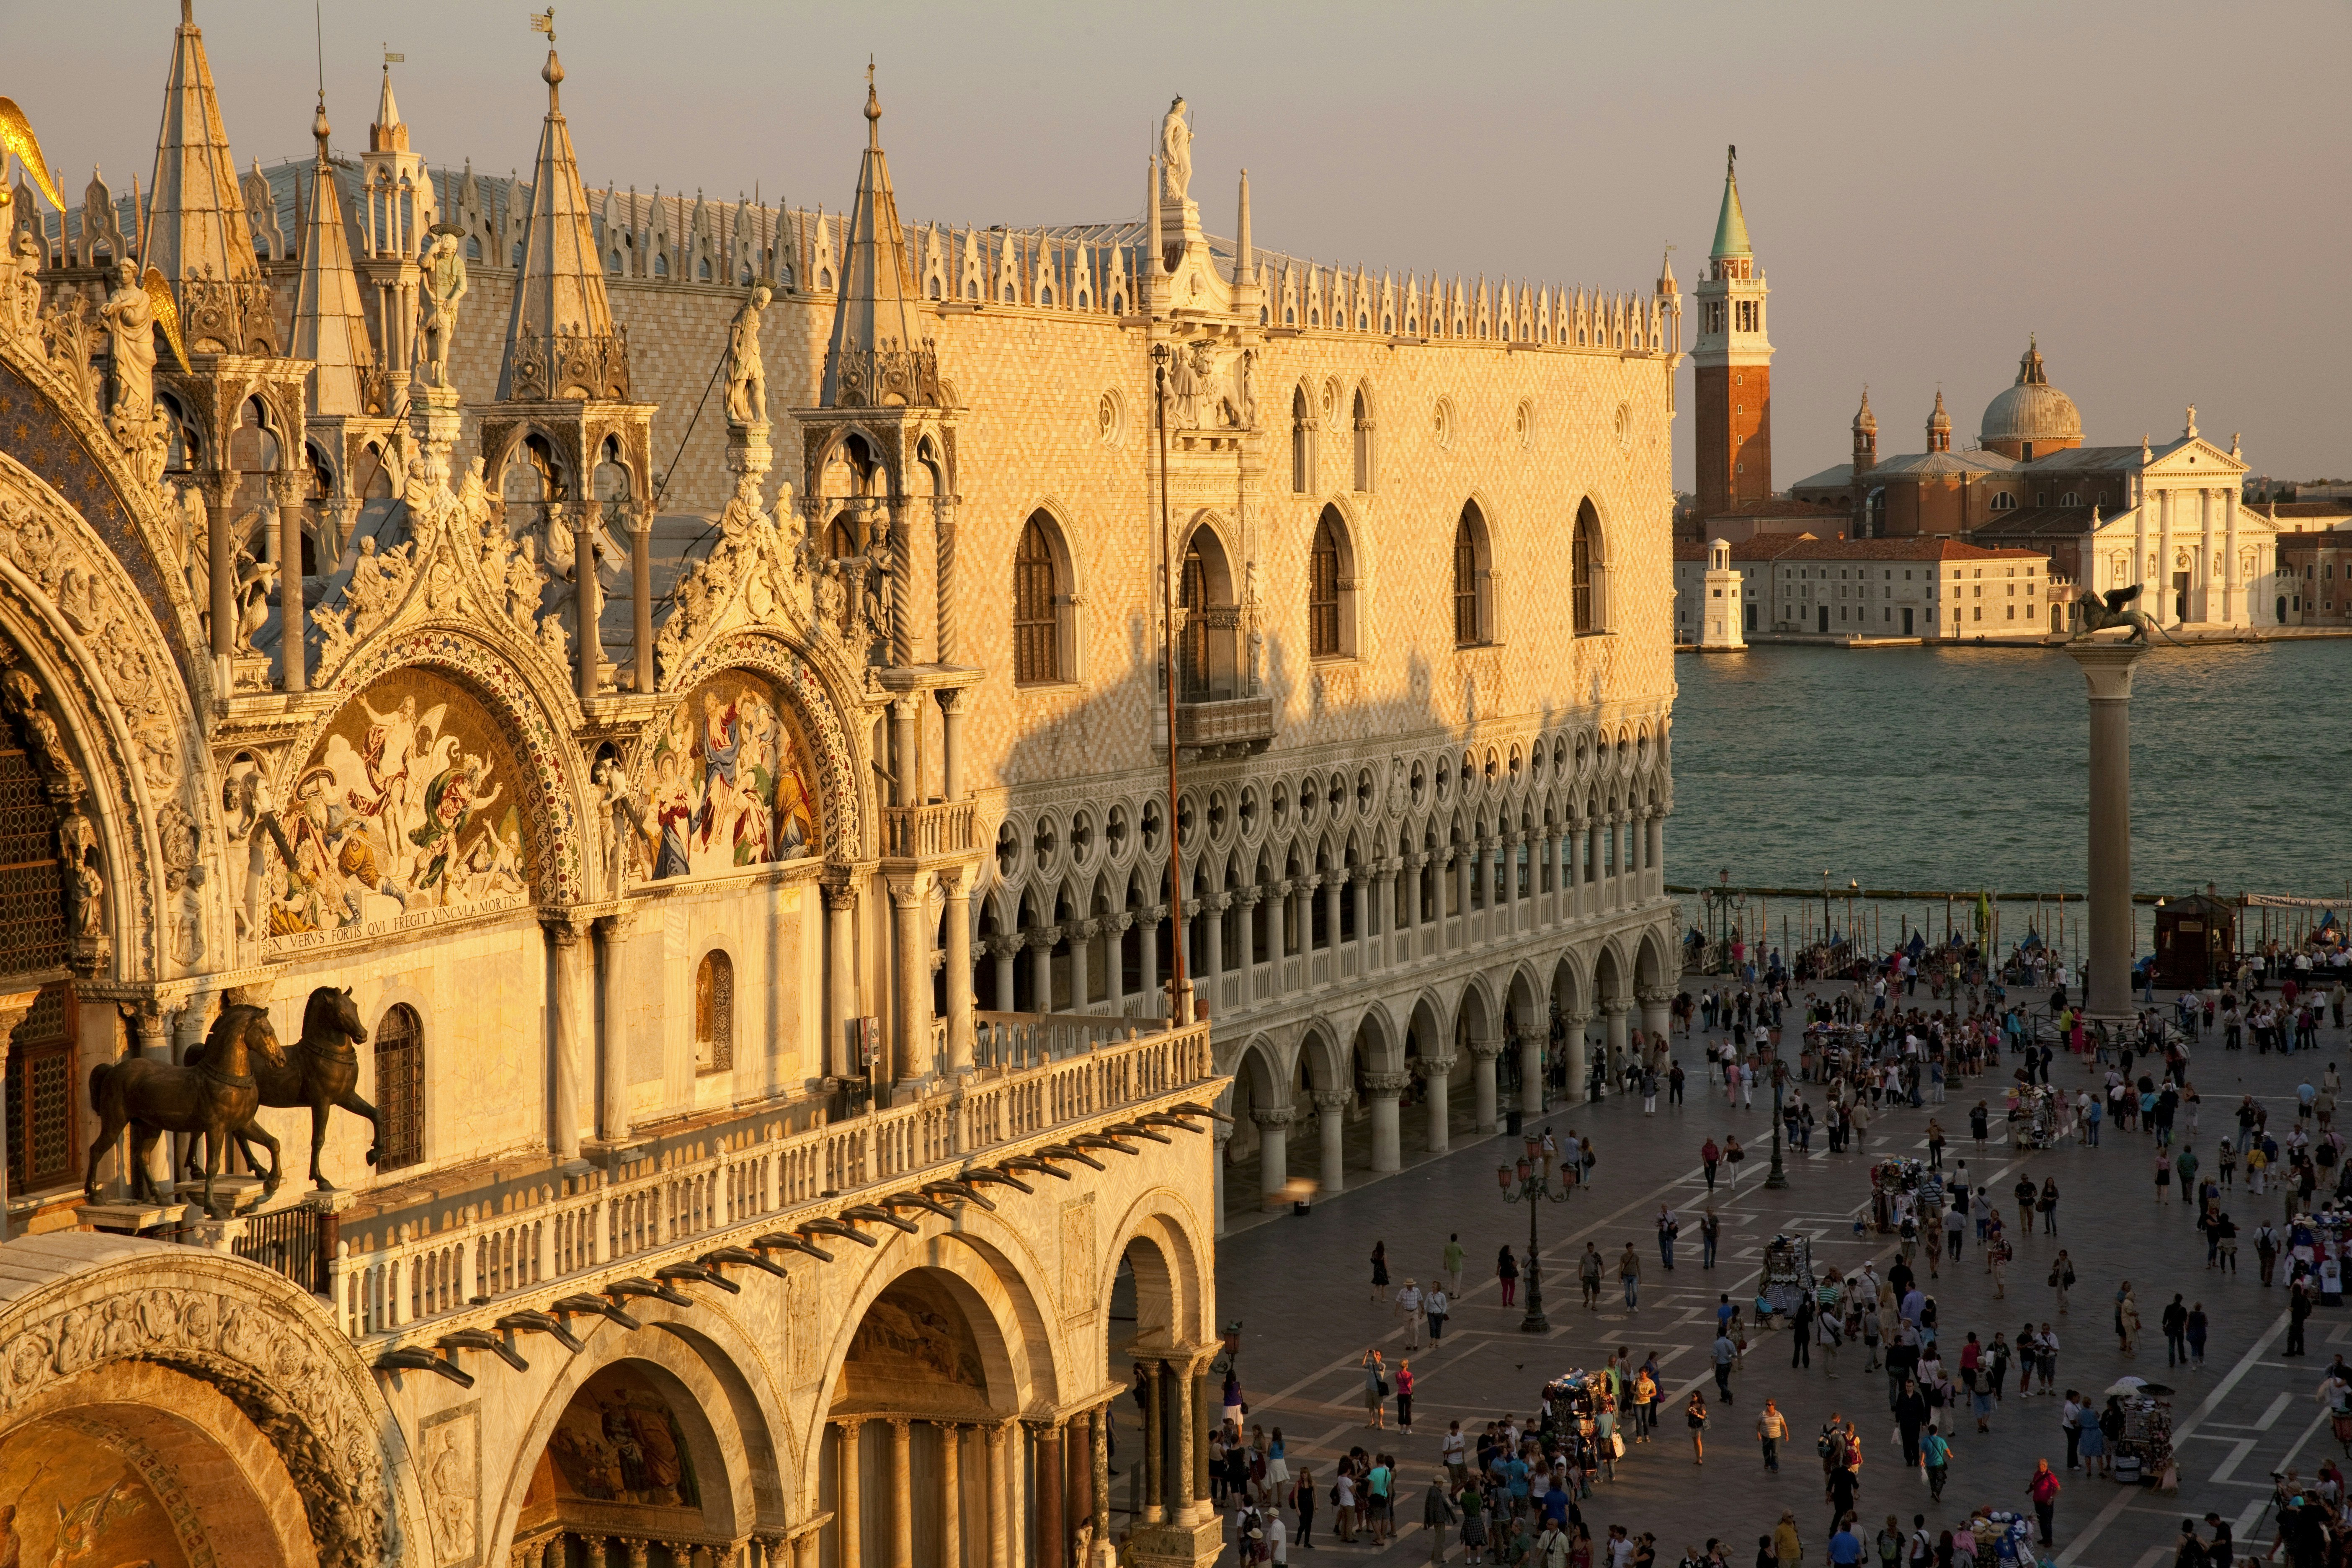 A picture of St. Mark's Basilica taken from above at sunset, with golden light washing over the building